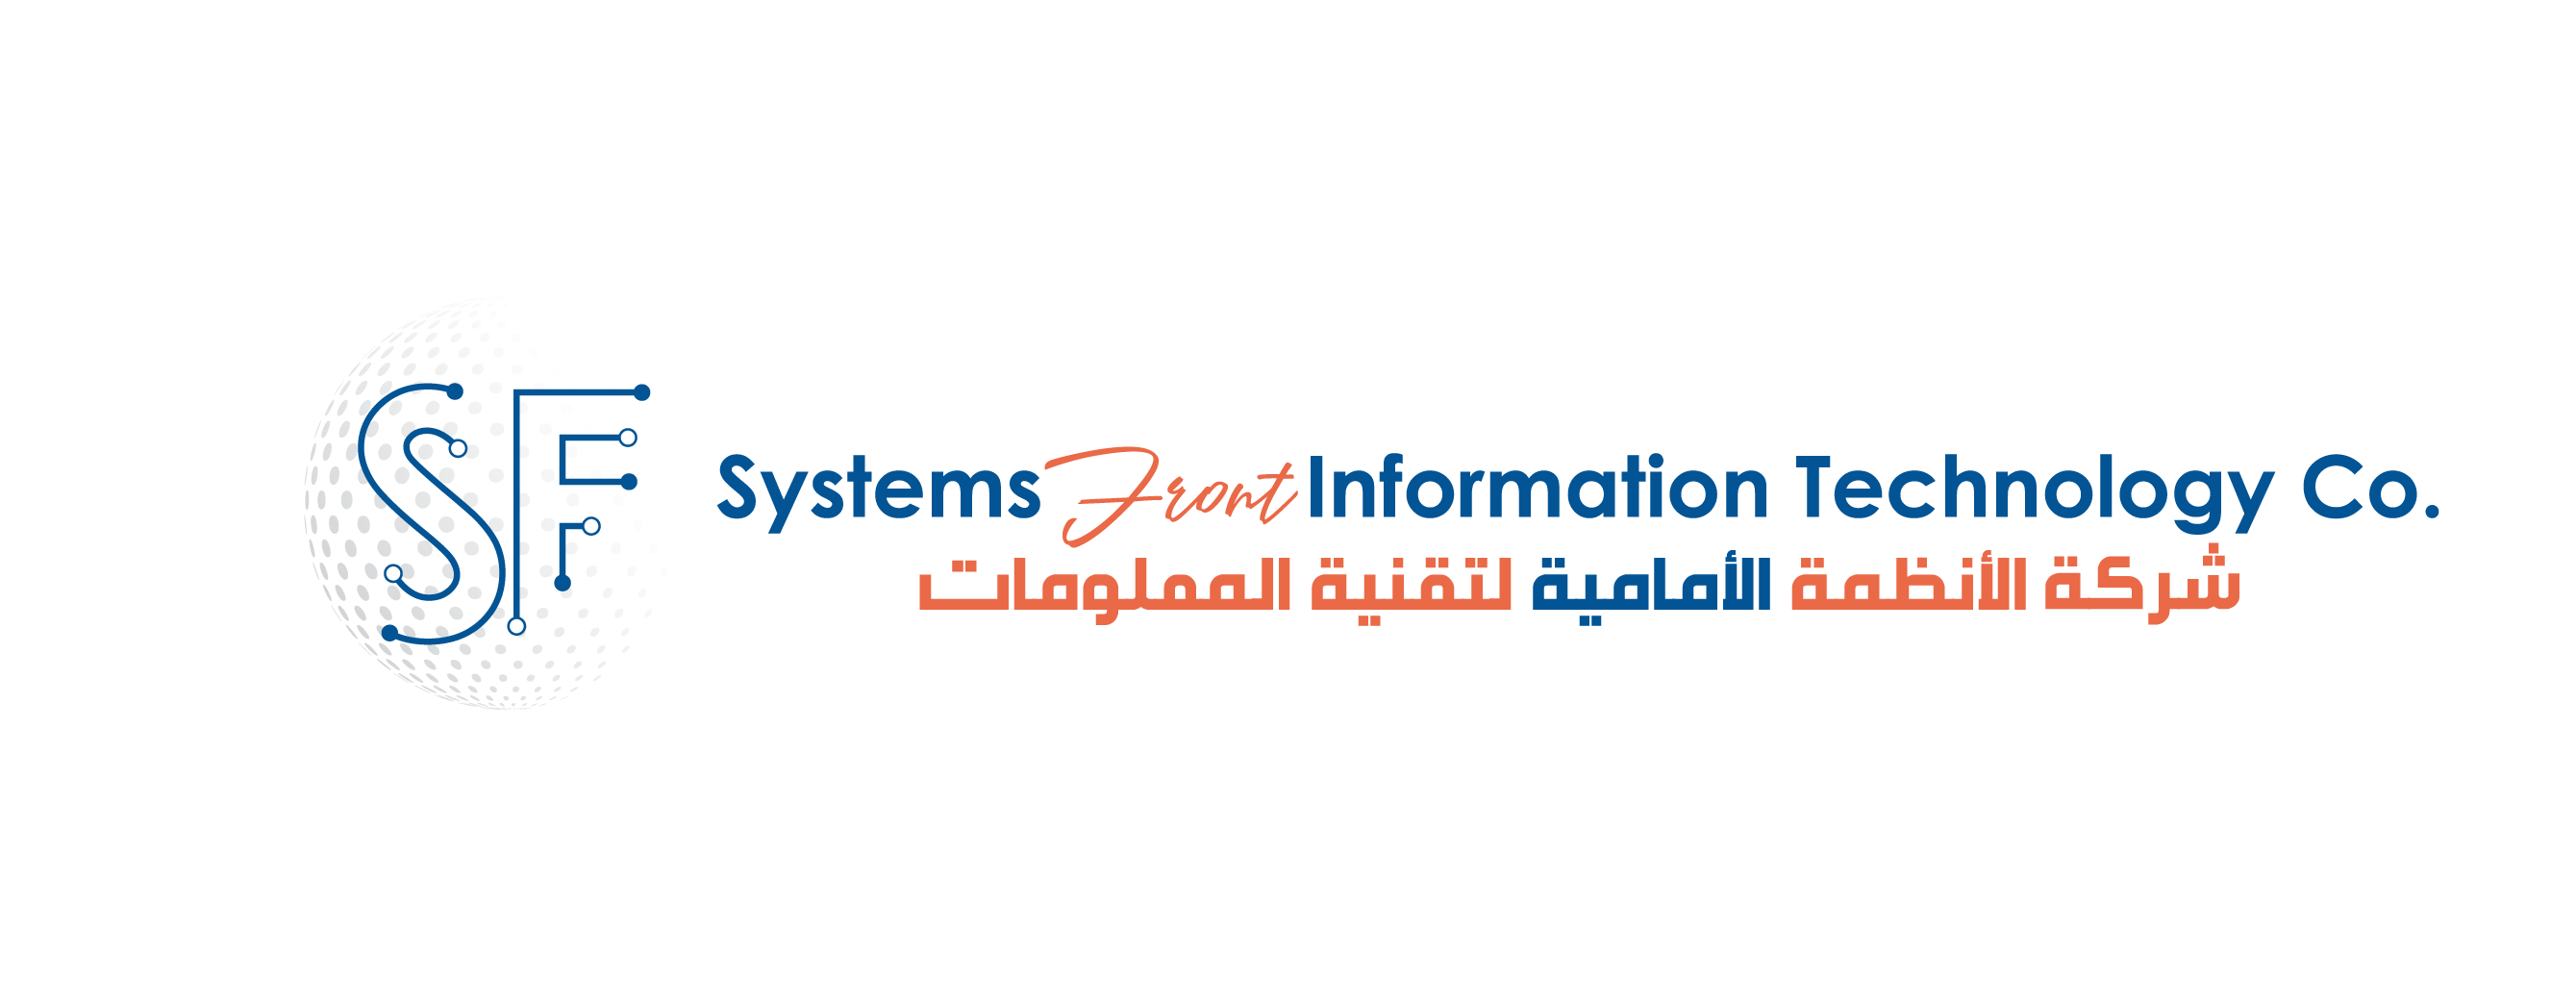 Systems Front Information Technology Co